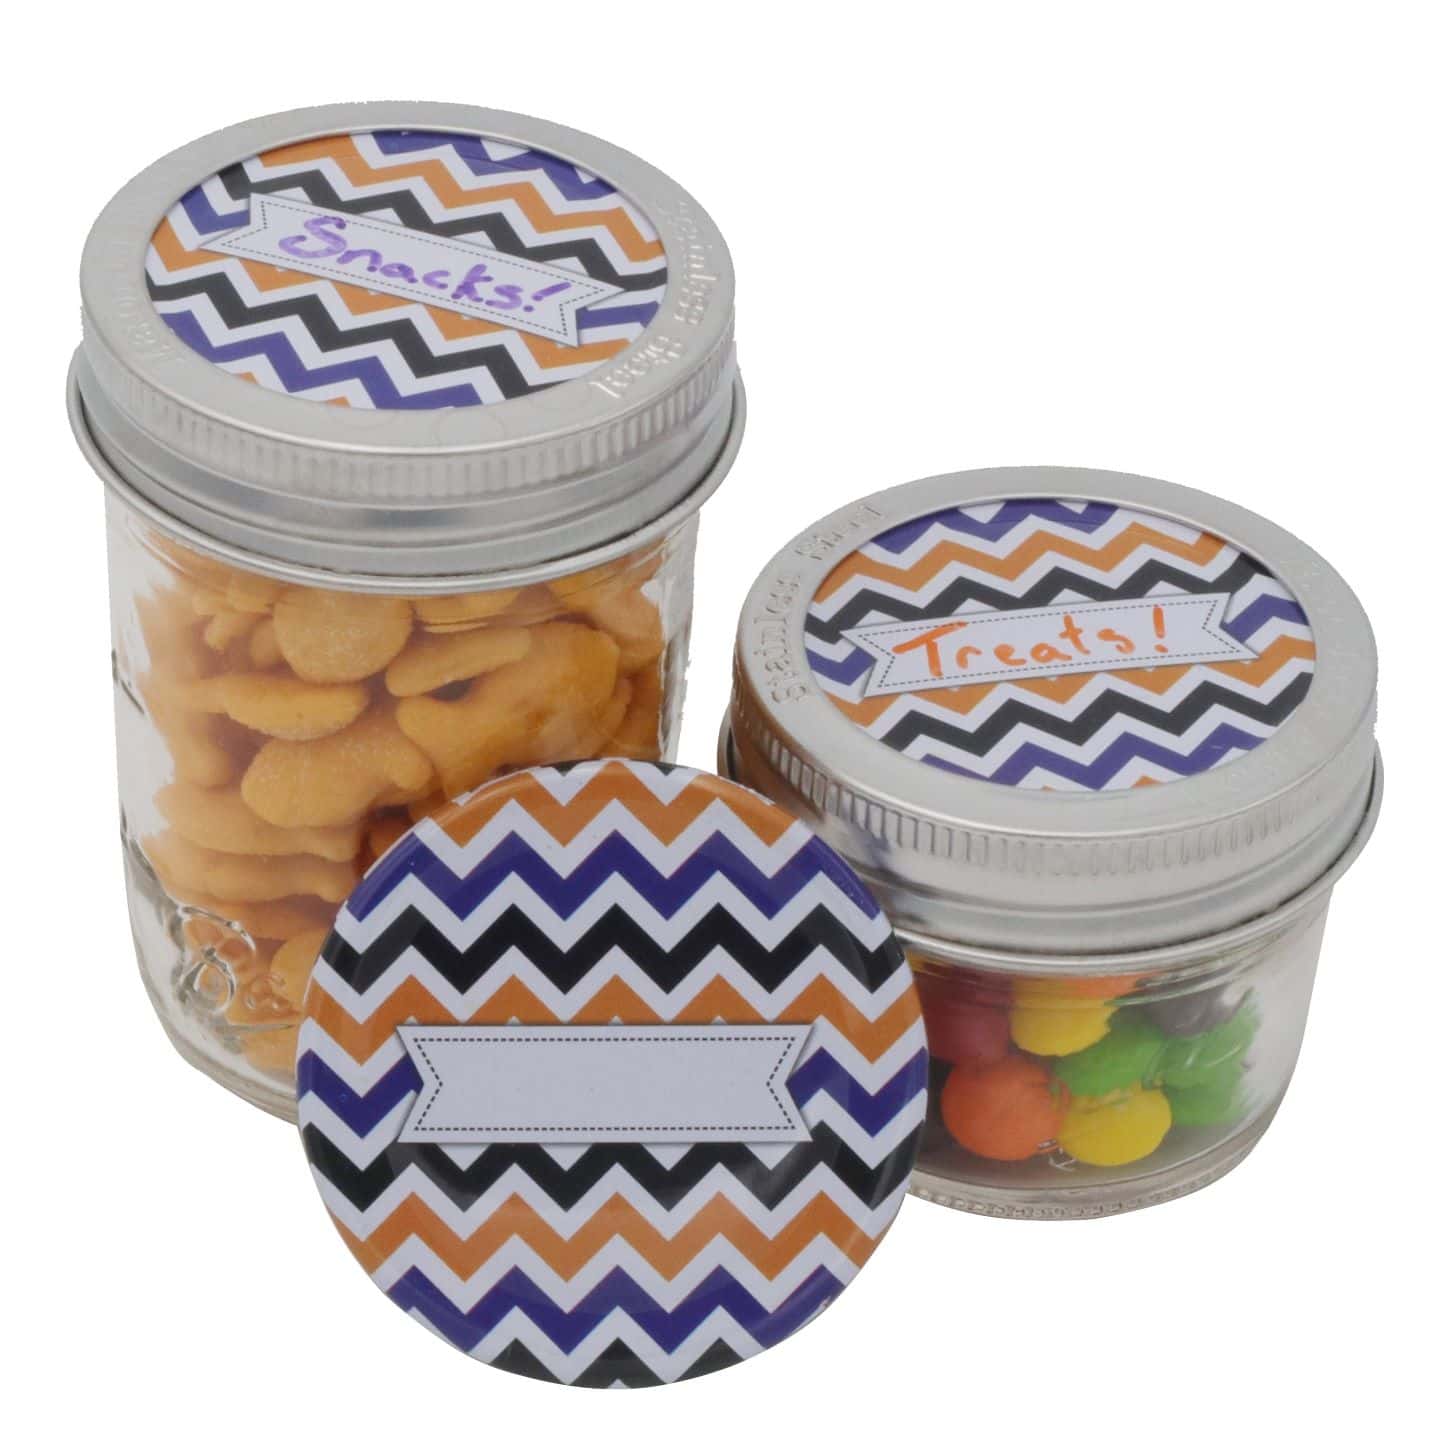 Mason Jar Lifestyle Fall Halloween blog post using lids and accessories to make Ball Kerr canning jars into treats, candy table, gifts, party favors, decorations